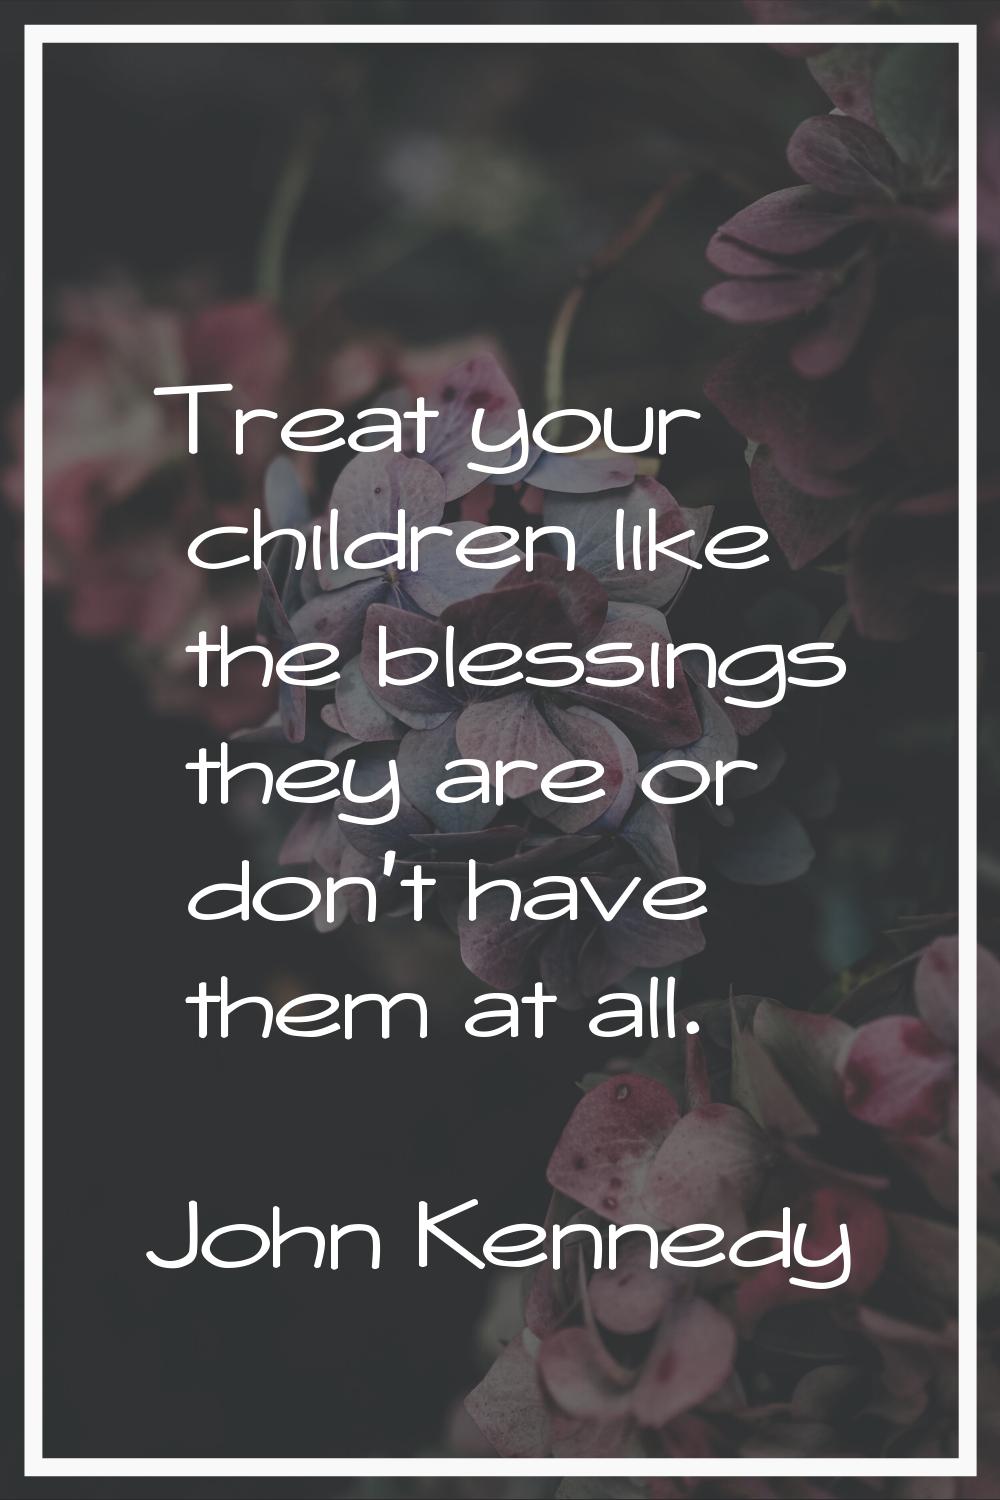 Treat your children like the blessings they are or don't have them at all.